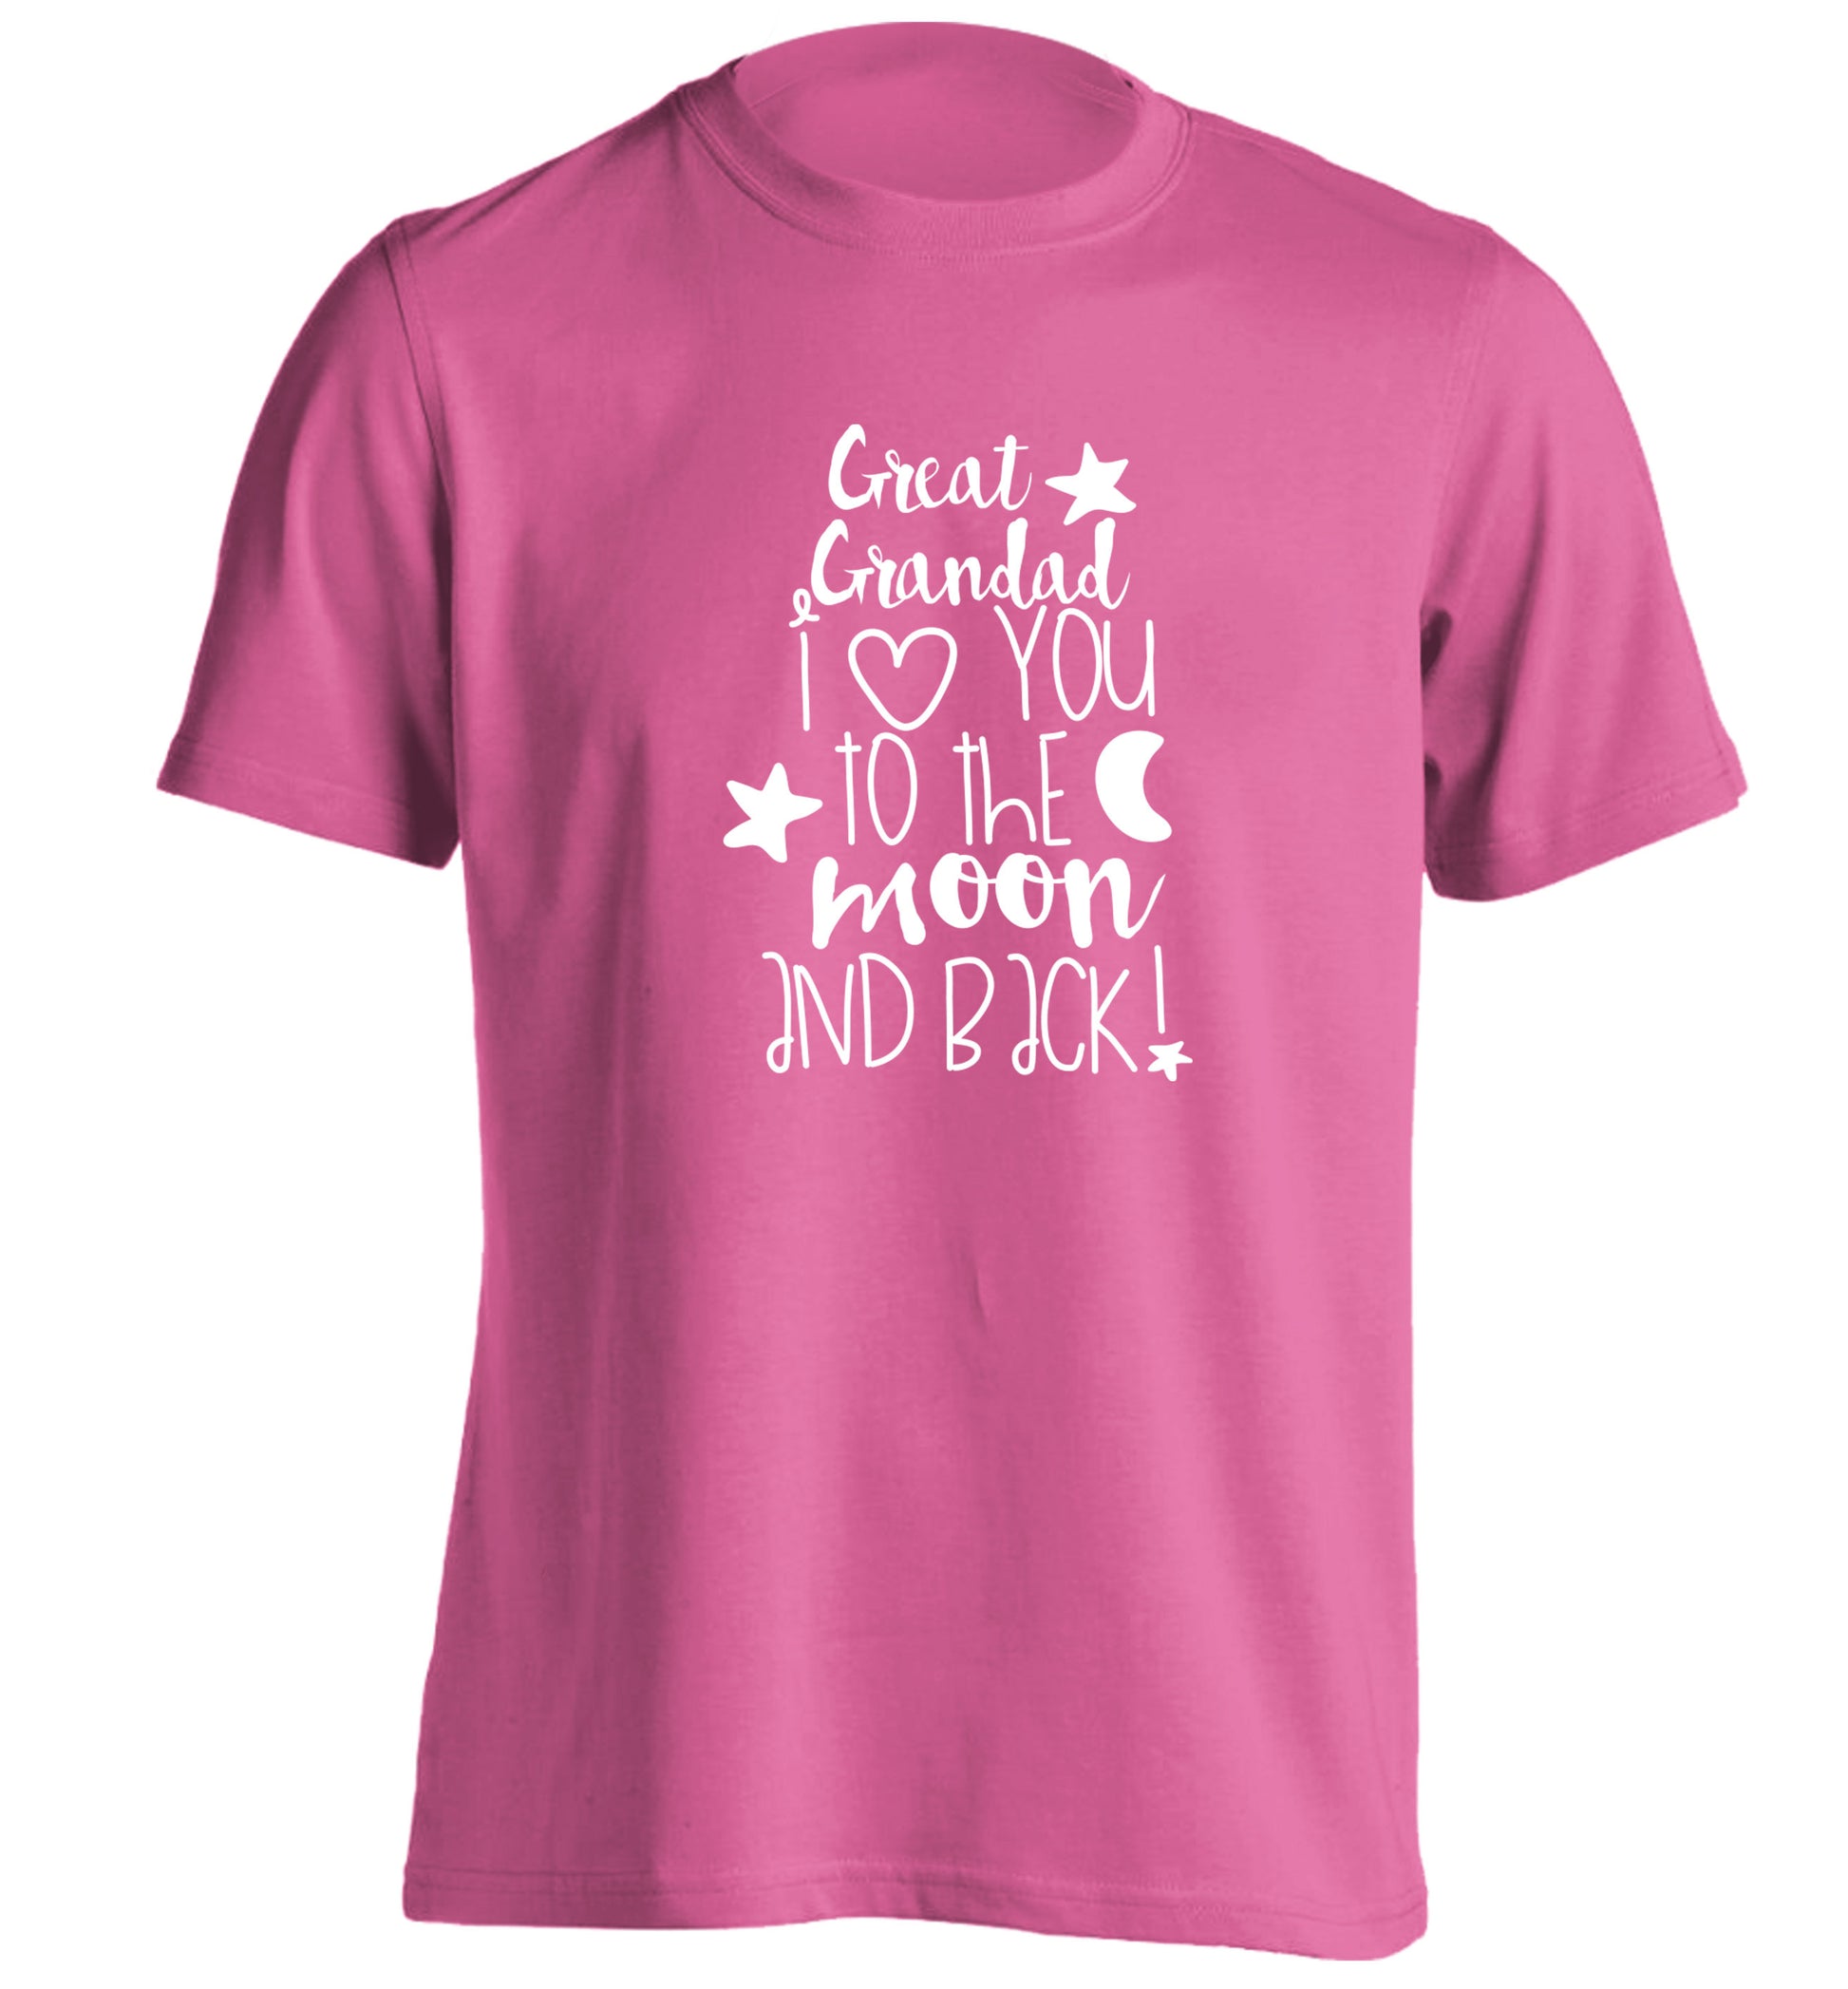 Great Grandad I love you to the moon and back adults unisex pink Tshirt 2XL